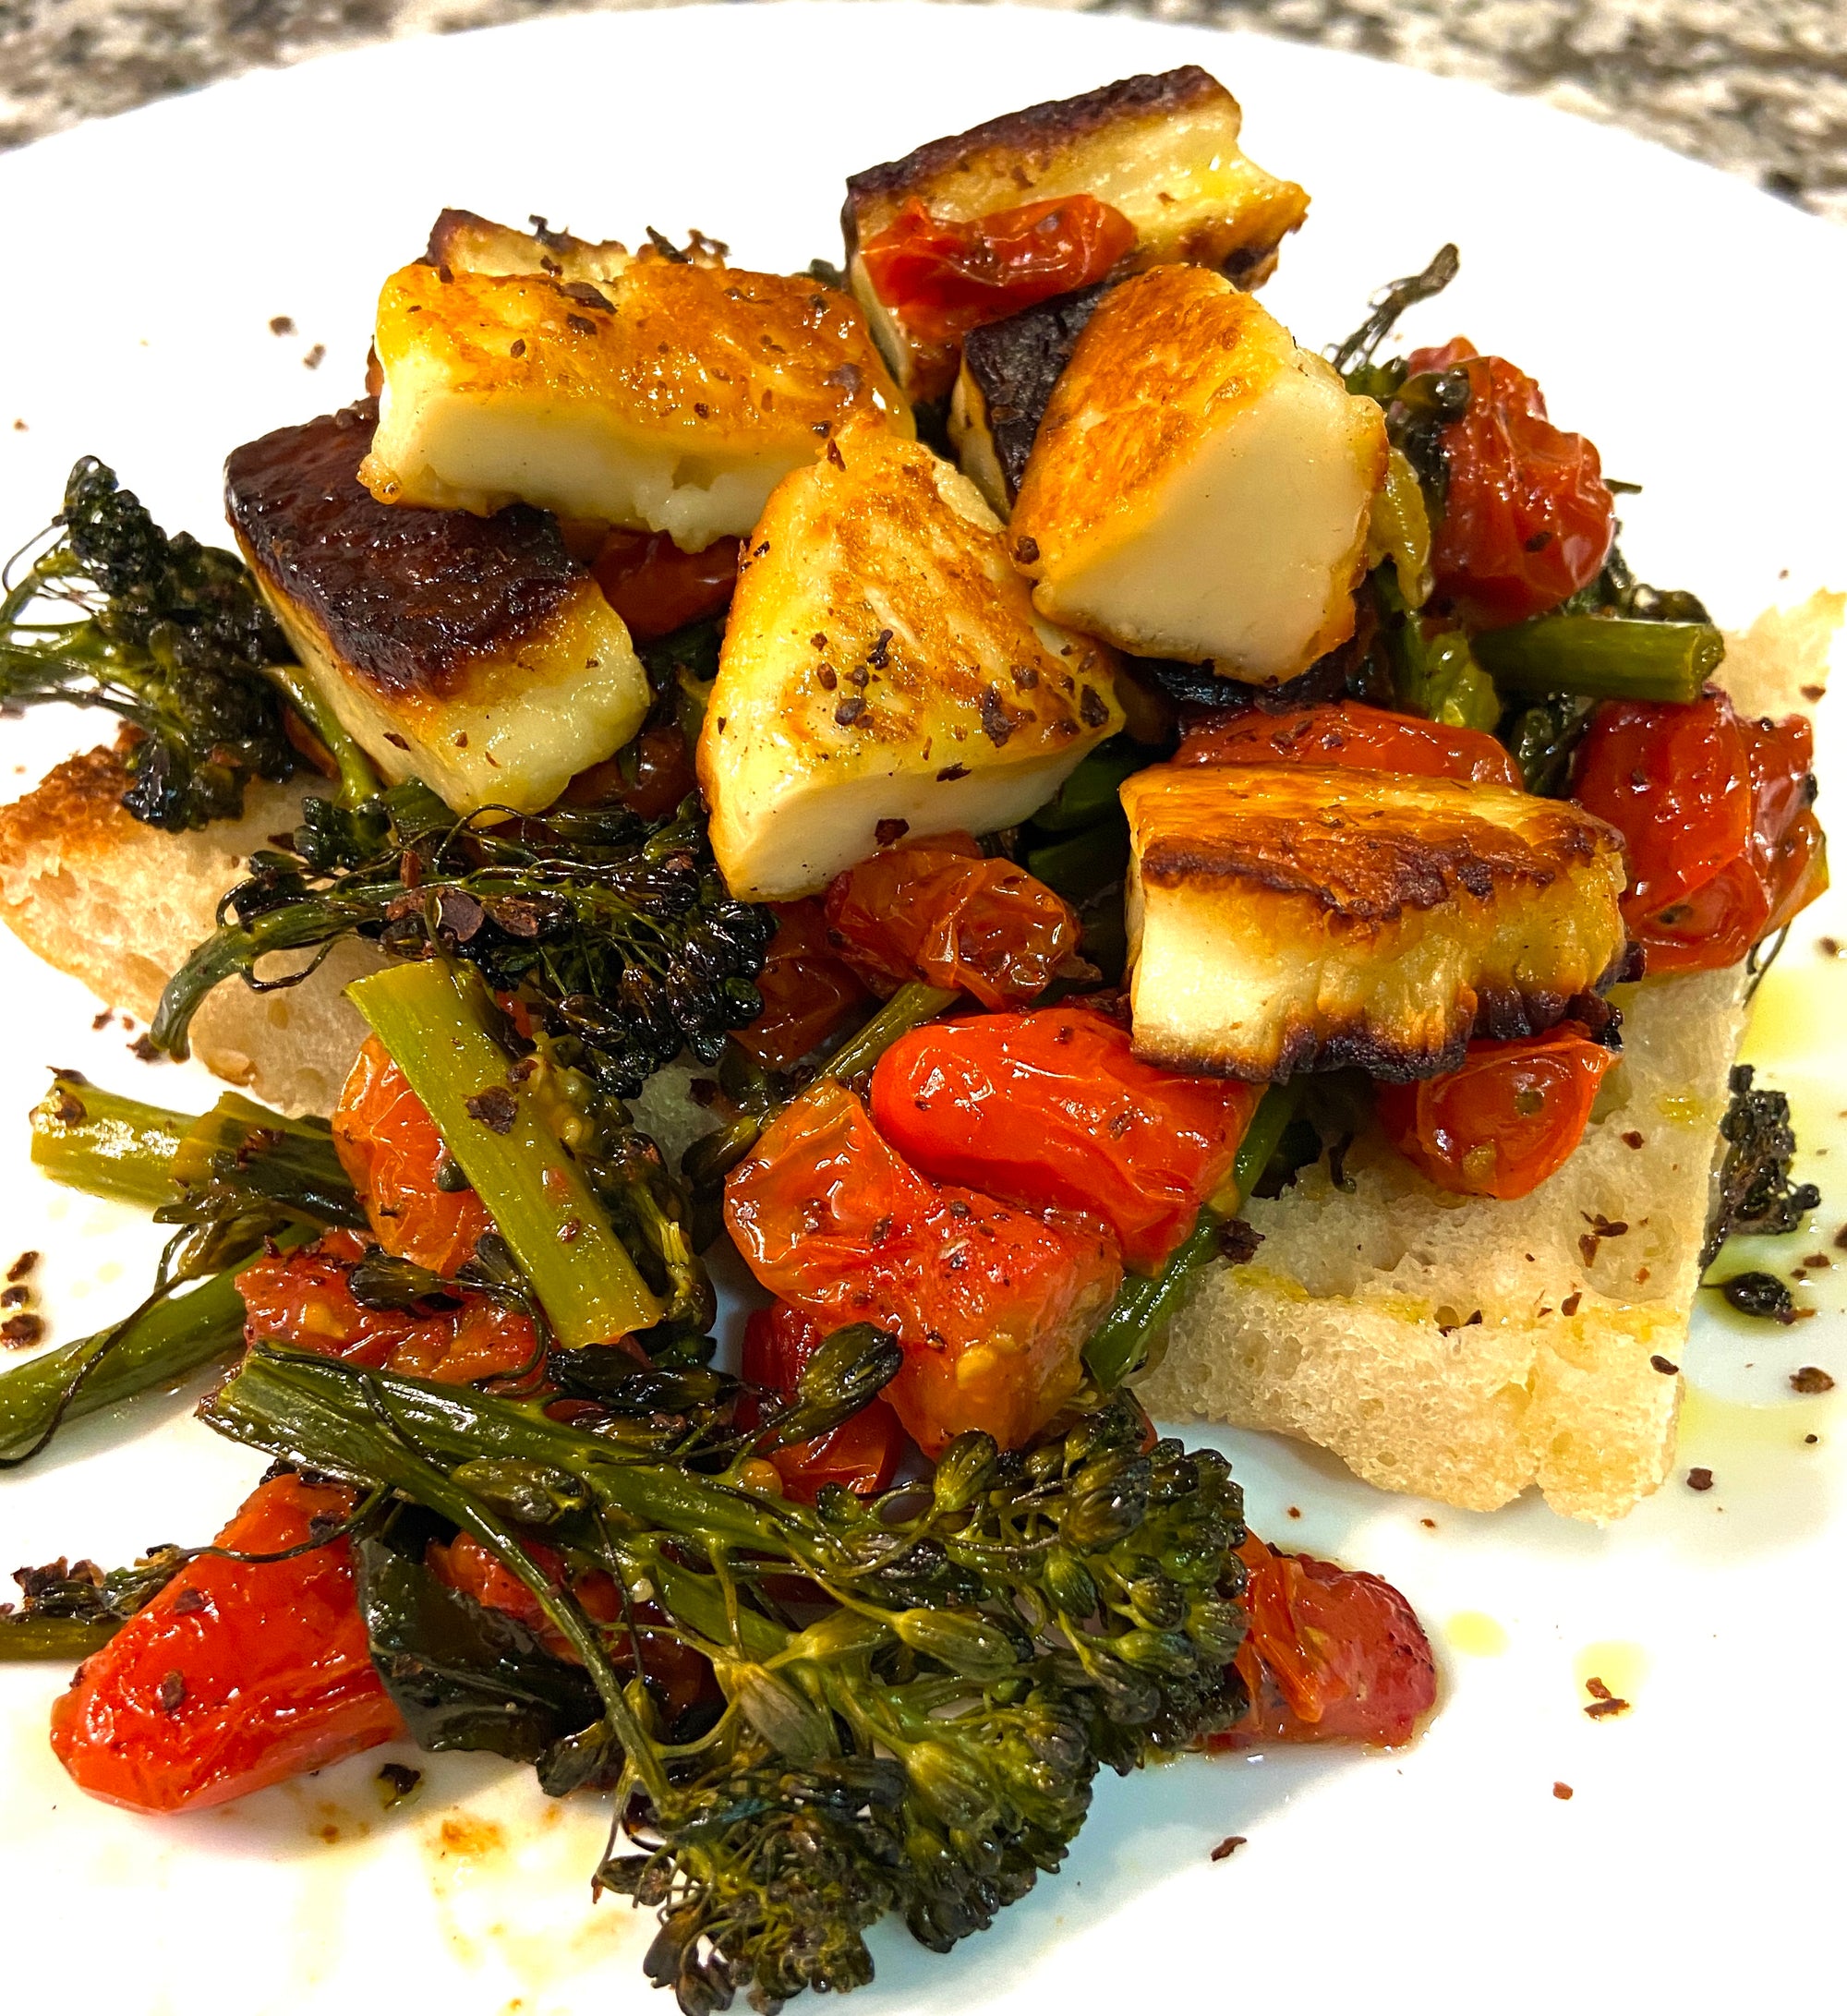 Pan Fried Halloumi with Broccolini and Tomatoes